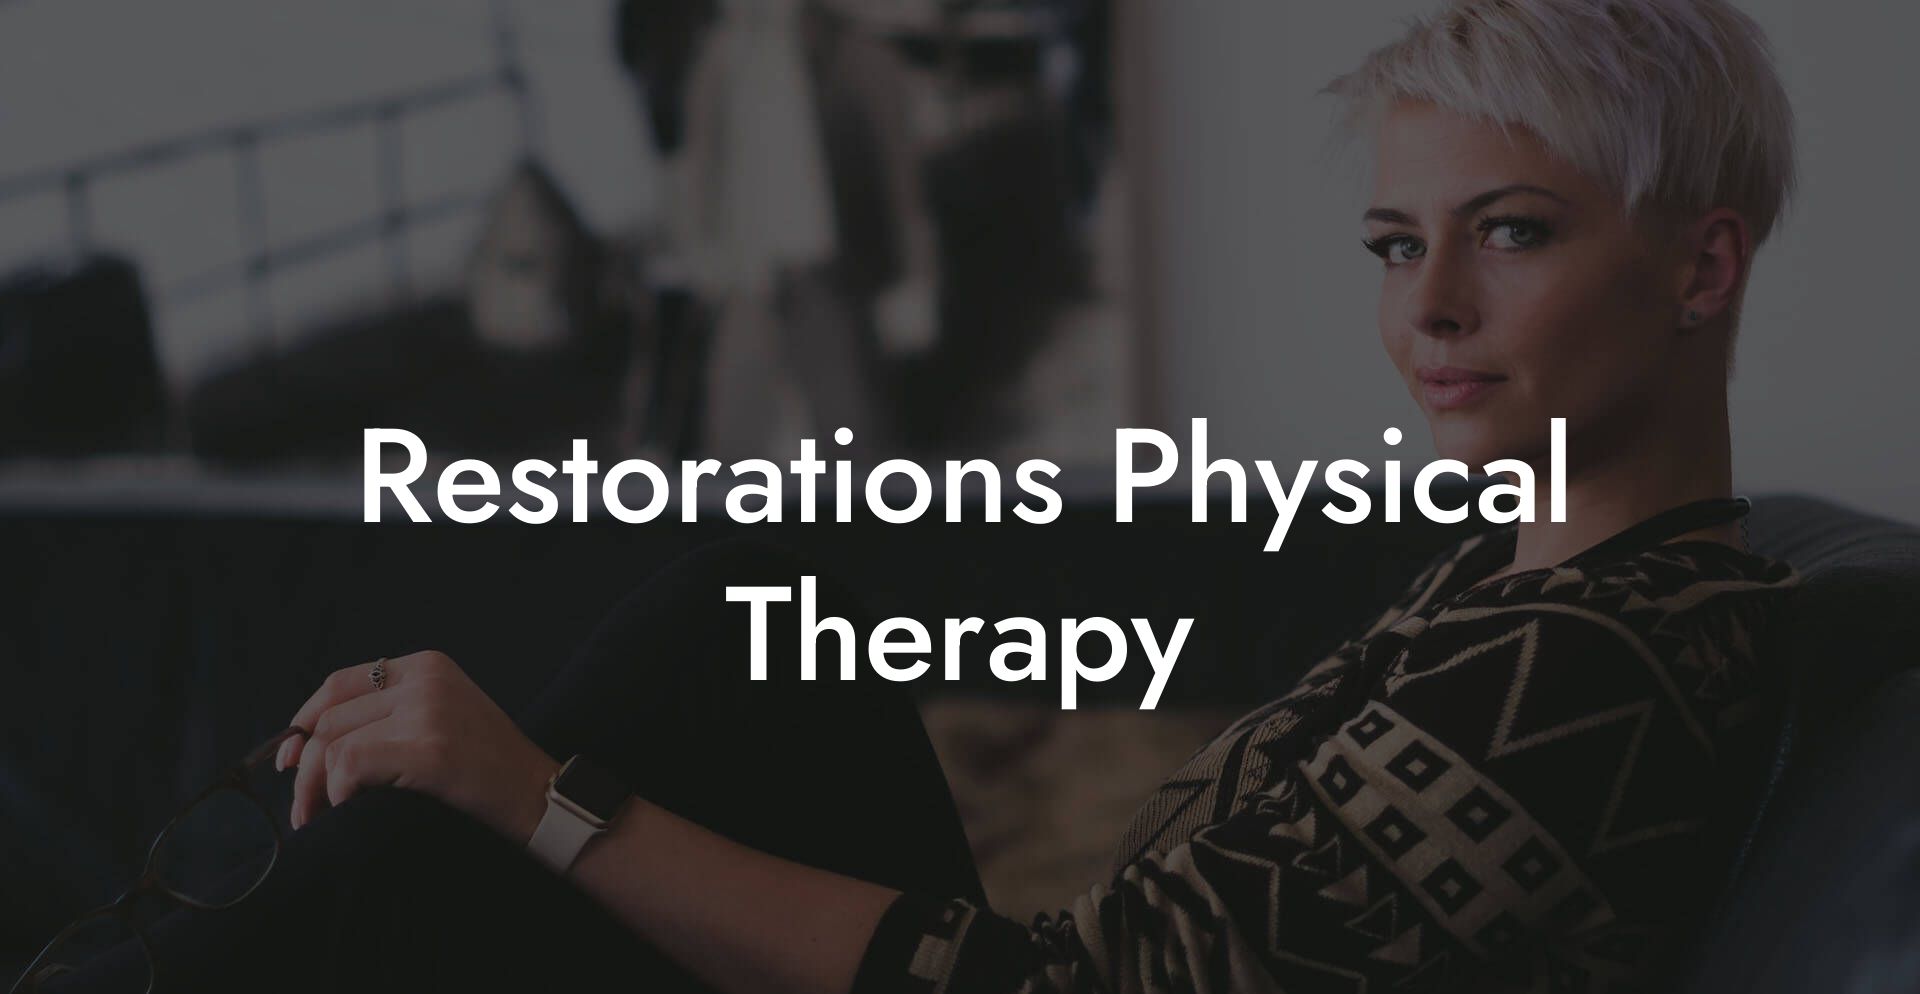 Restorations Physical Therapy